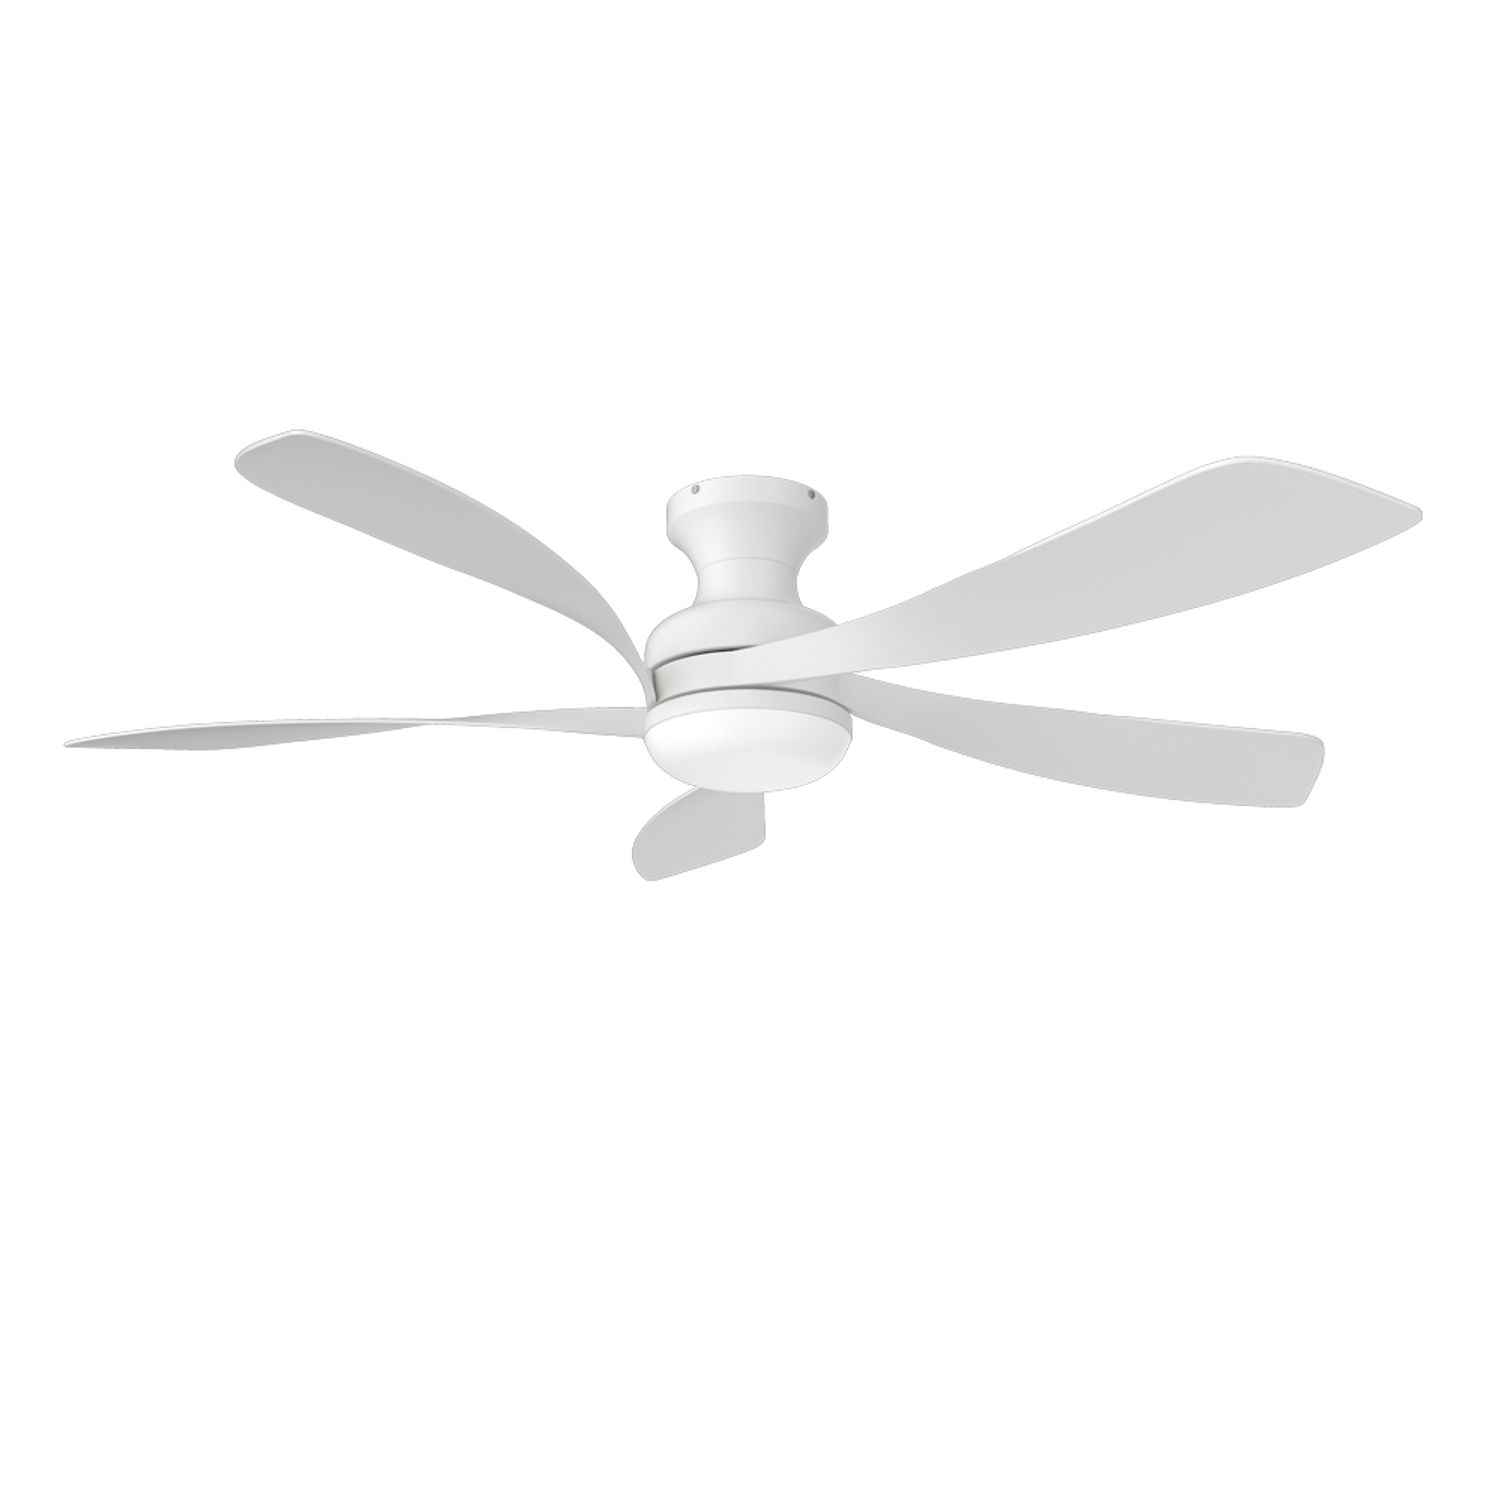 KBS All White Unique 5-Blade Wooden Ceiling Fan with Lights & Remote